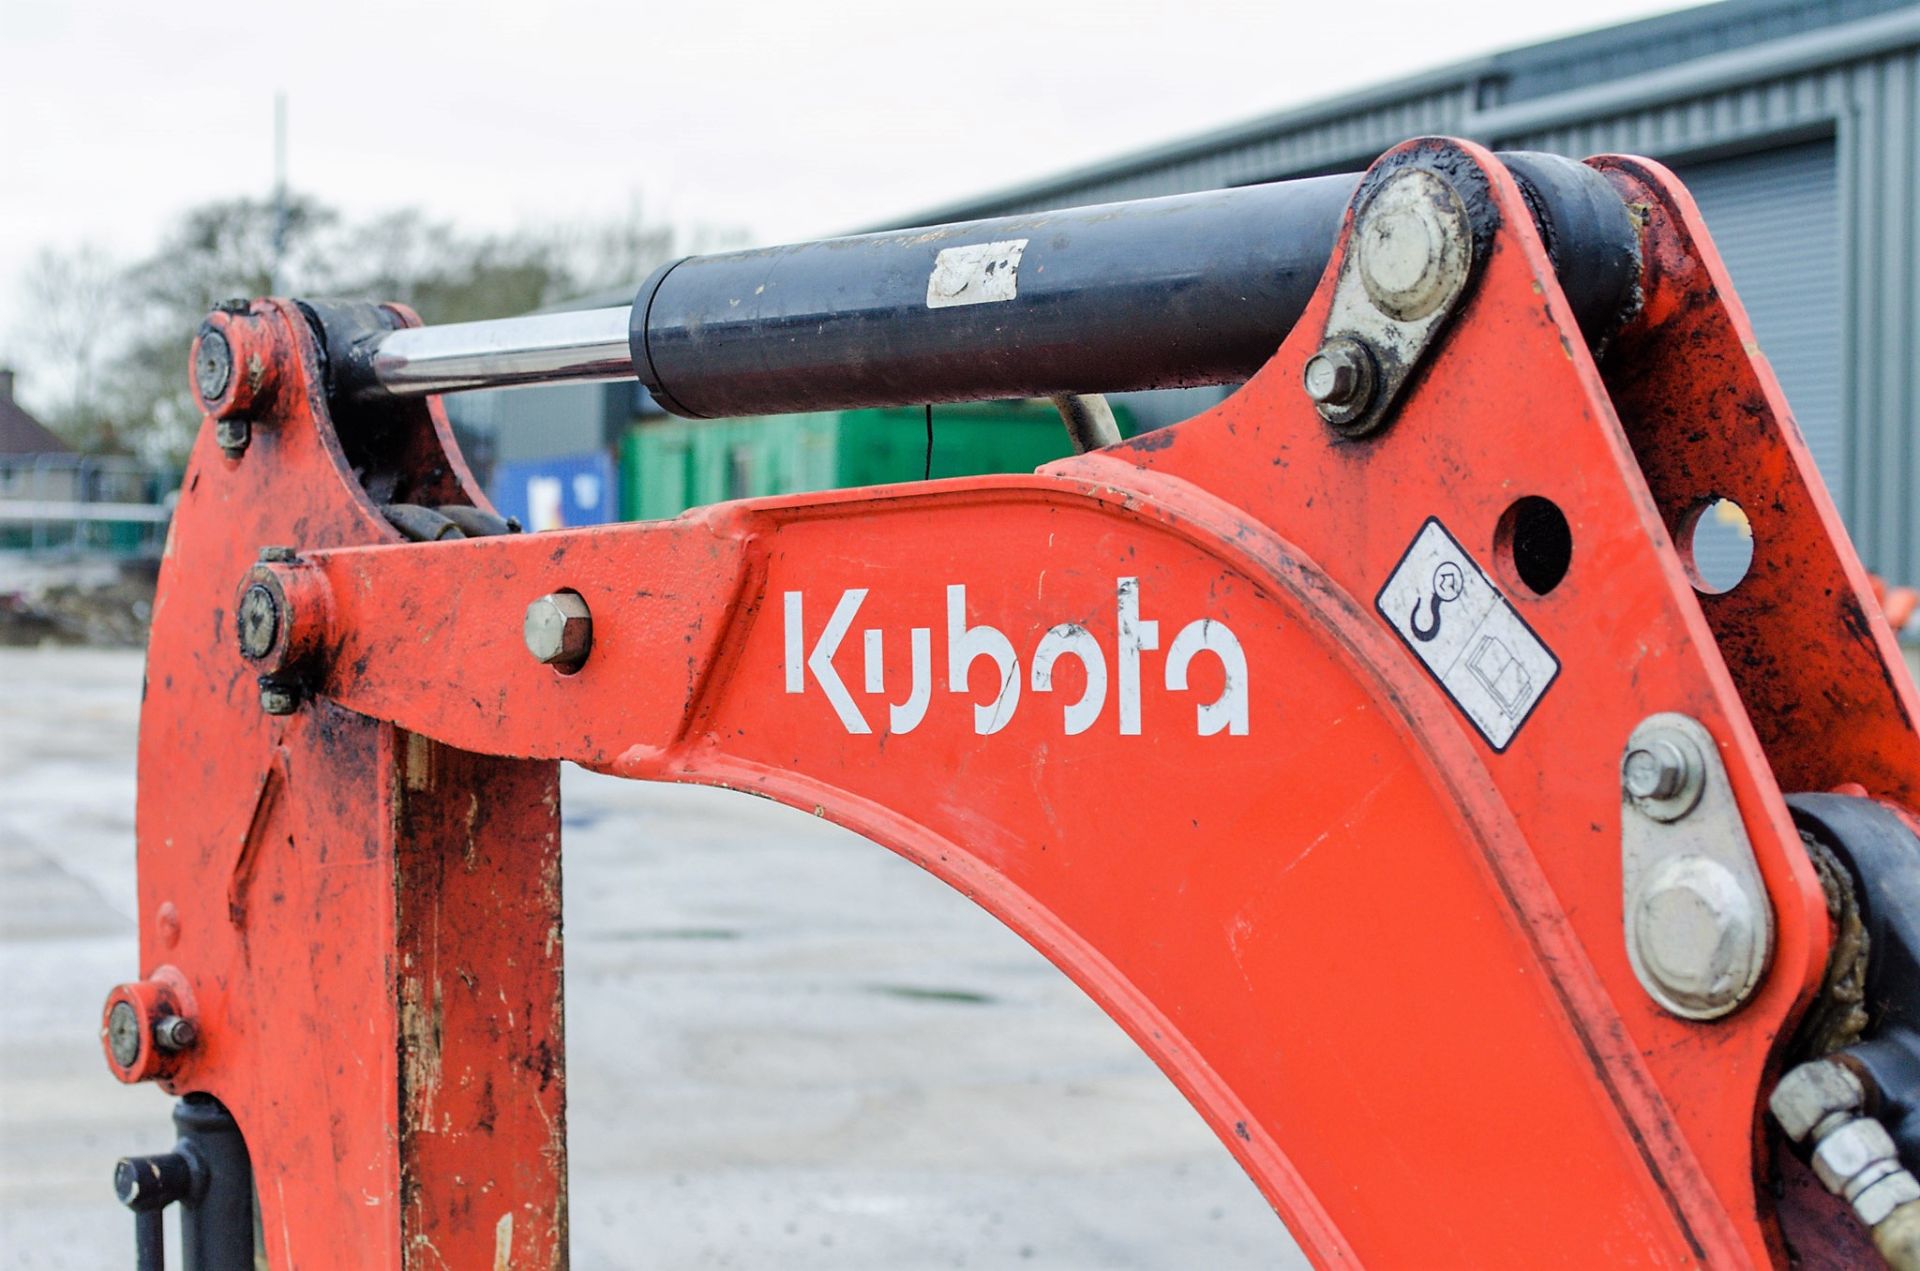 Kubota K008-3 0.8 tonne rubber tracked micro excavator Year: 2017 S/N: 29274 Recorded Hours: 1105 - Image 13 of 18